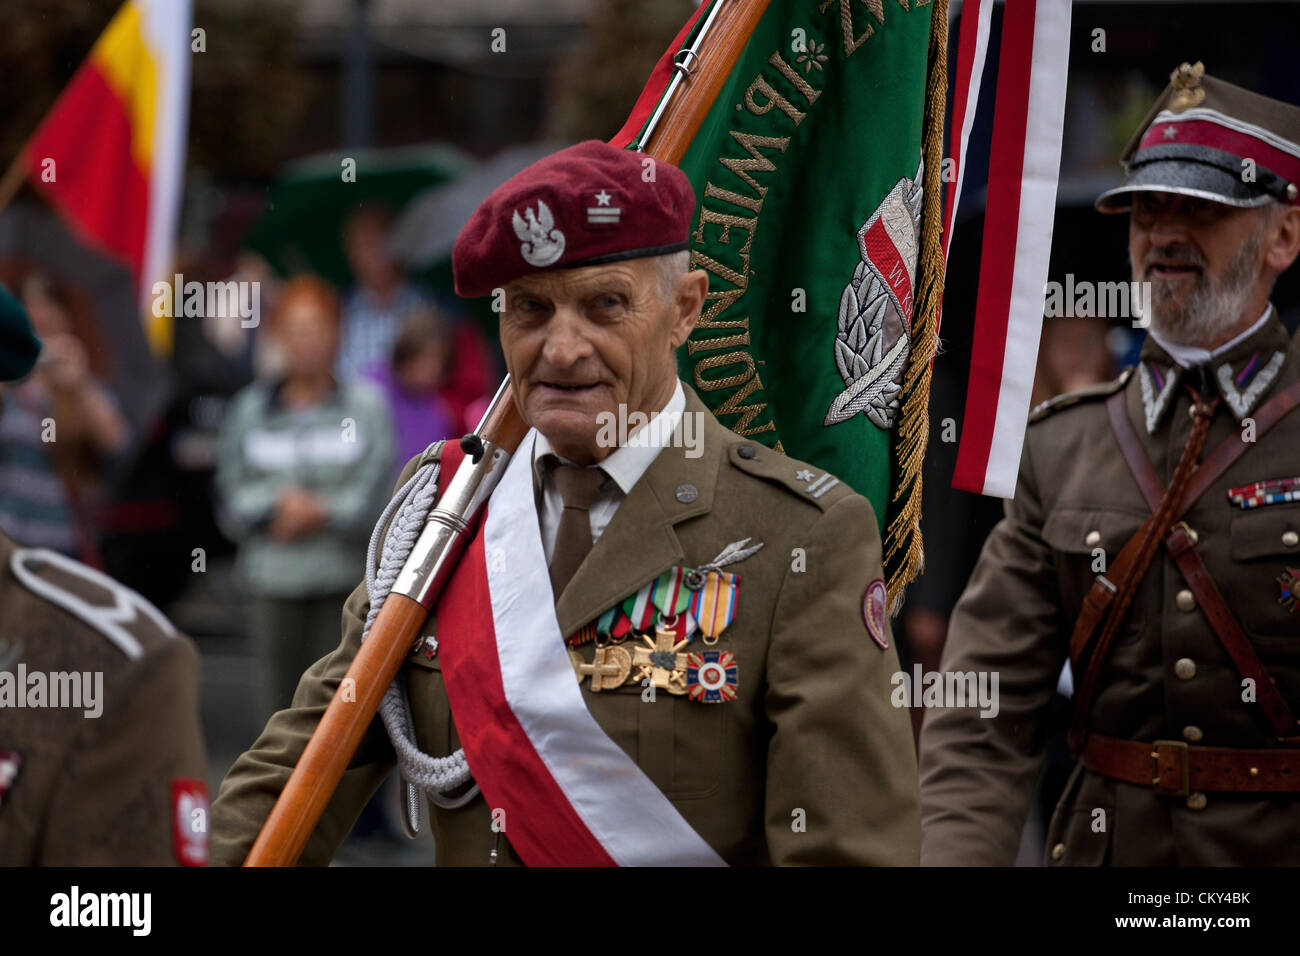 September 01, 2012. Cracow, Poland - Veterans during 73rd anniversary of the beginning of World War II. The start of the war is generally held to be 1 September 1939, beginning with the German invasion of Poland. Britain and France declared war on Germany two days later. Stock Photo